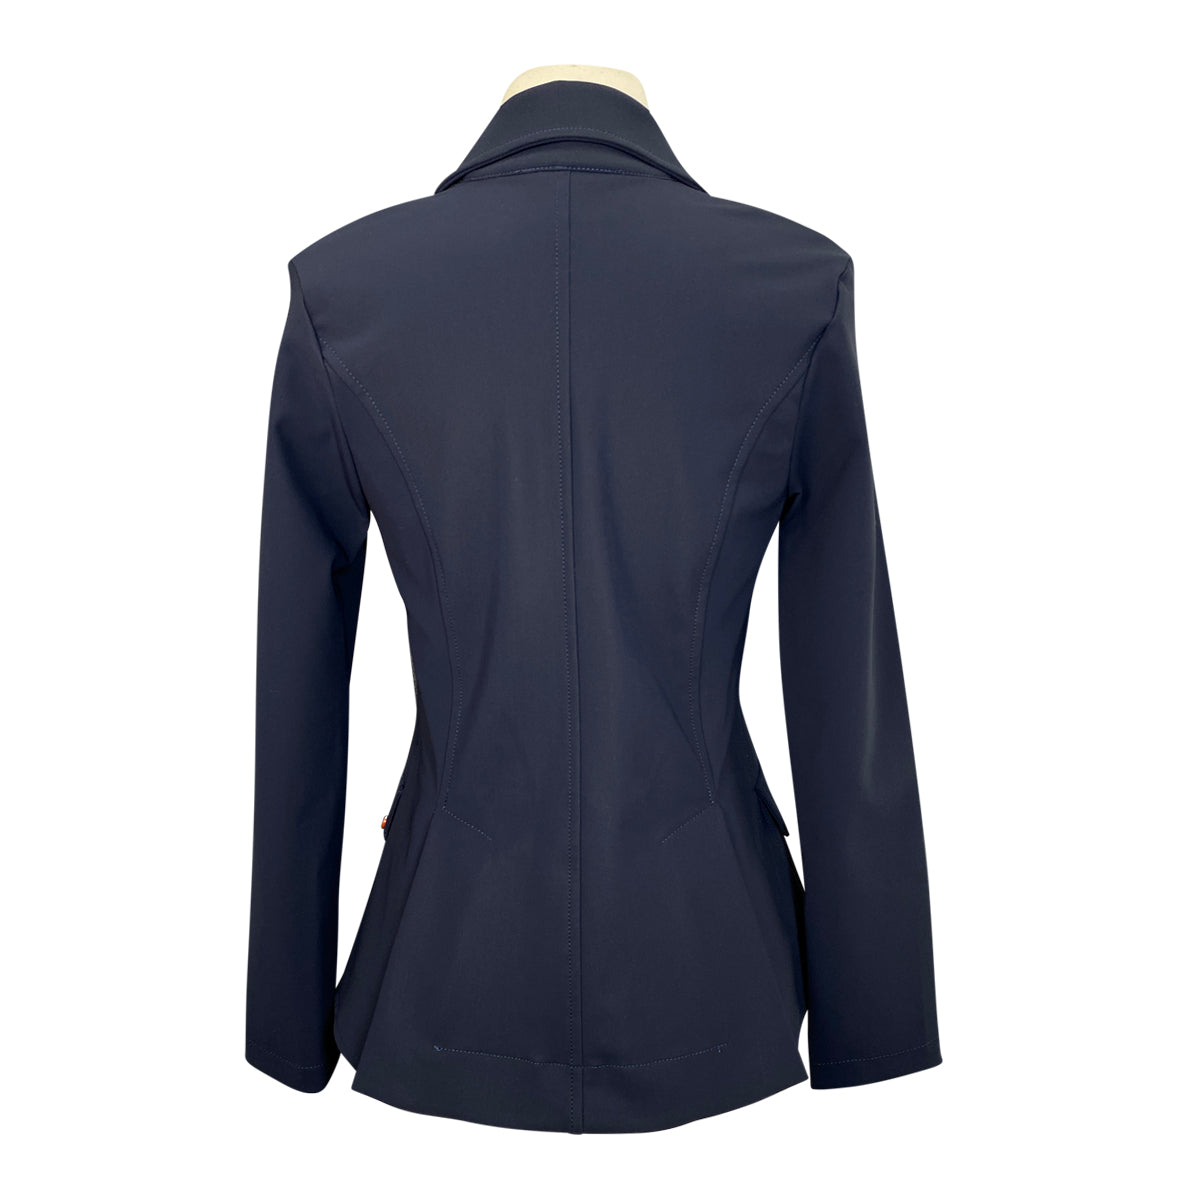 For Horses 'Yakie' Show Jacket in Navy